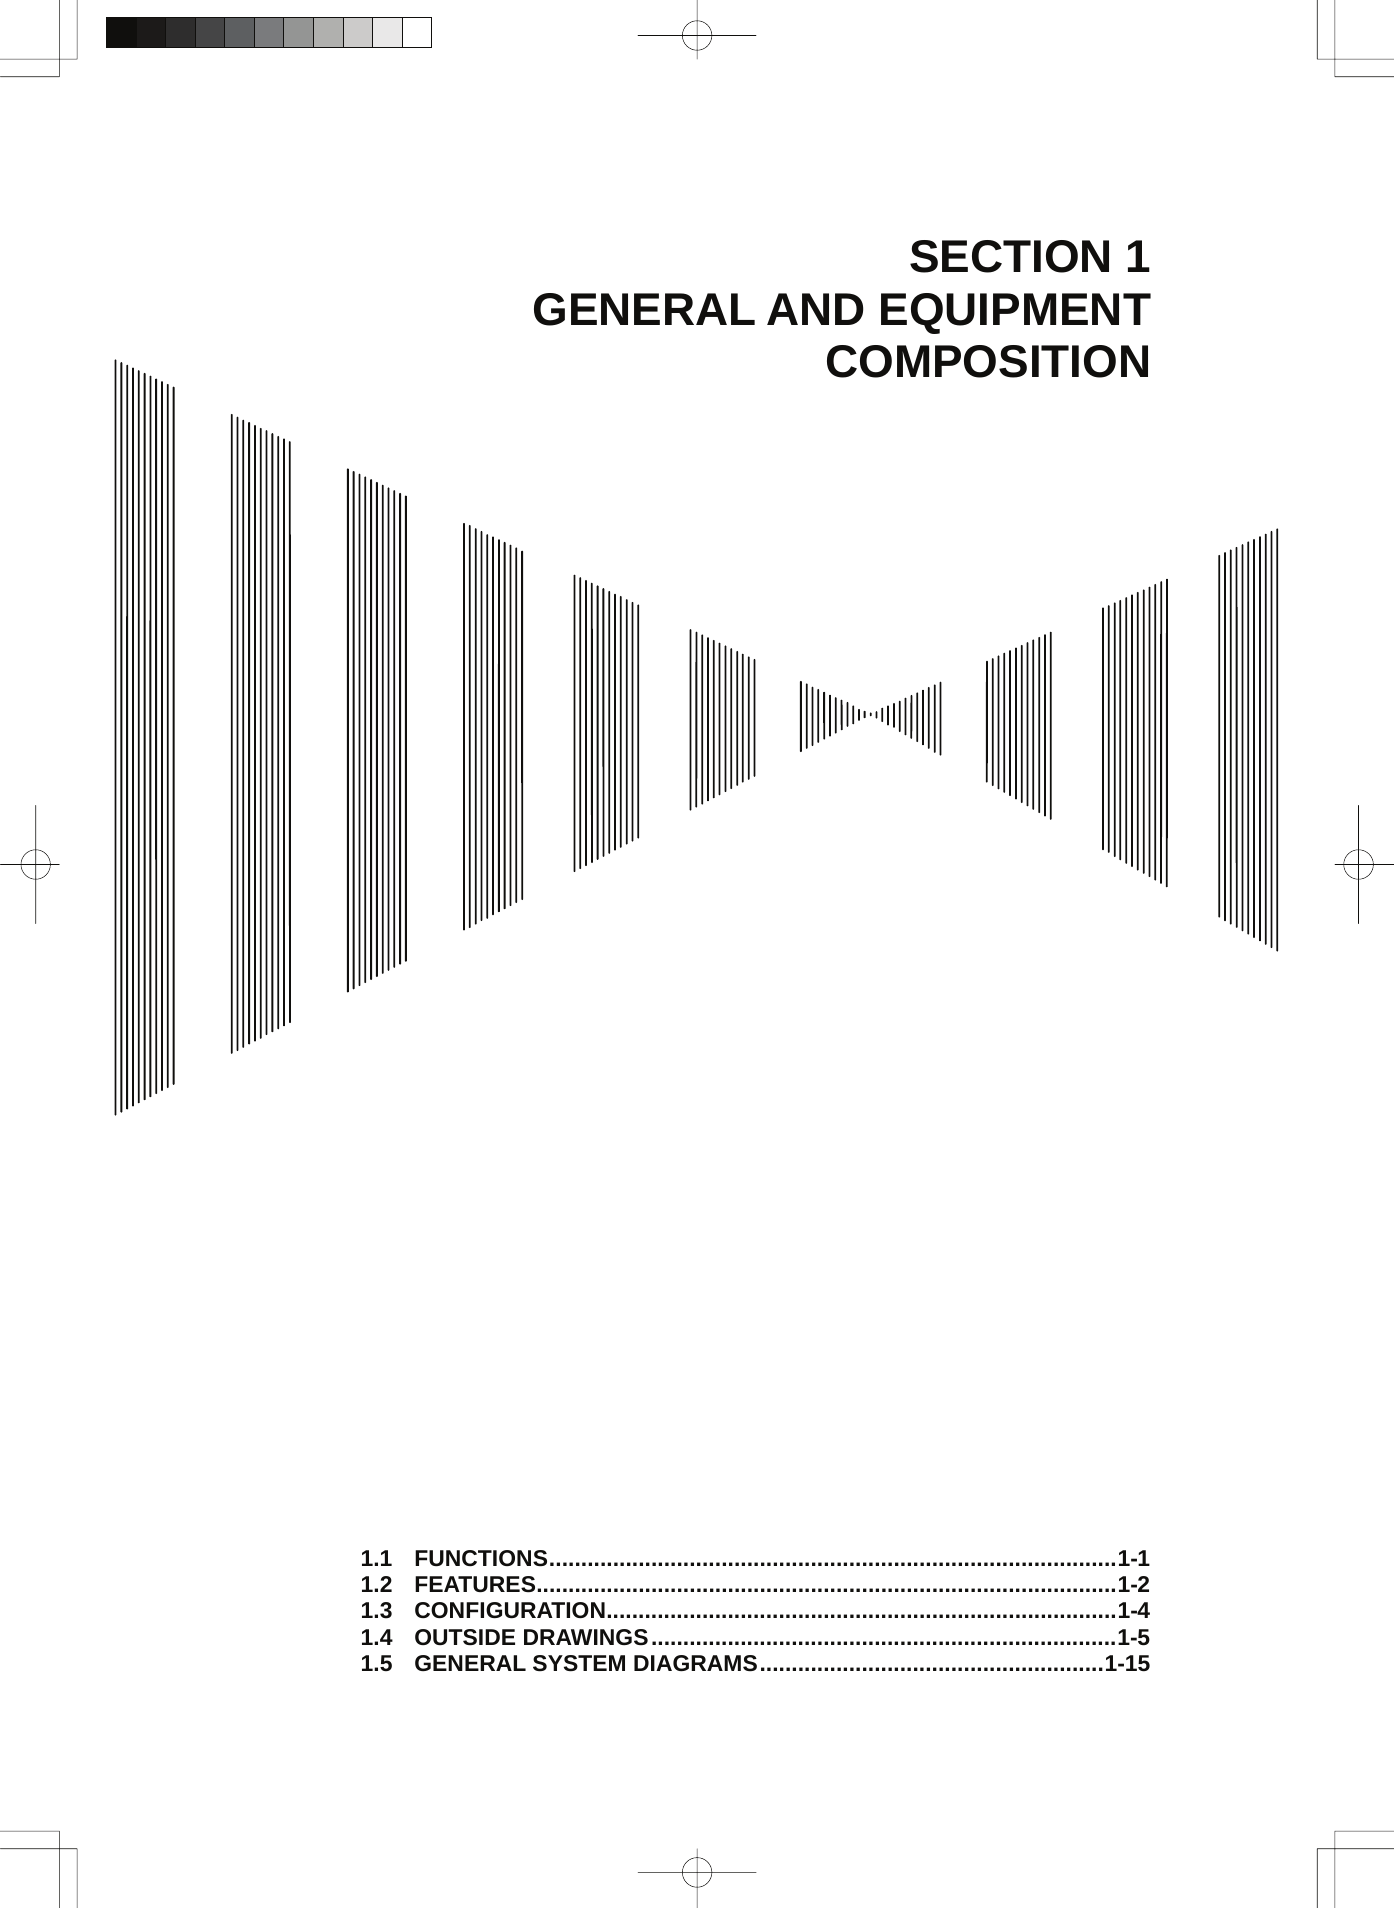  SECTION 1 GENERAL AND EQUIPMENT COMPOSITION                                            1.1 FUNCTIONS.........................................................................................1-1 1.2 FEATURES...........................................................................................1-2 1.3 CONFIGURATION................................................................................1-4 1.4 OUTSIDE DRAWINGS.........................................................................1-5 1.5 GENERAL SYSTEM DIAGRAMS......................................................1-15 